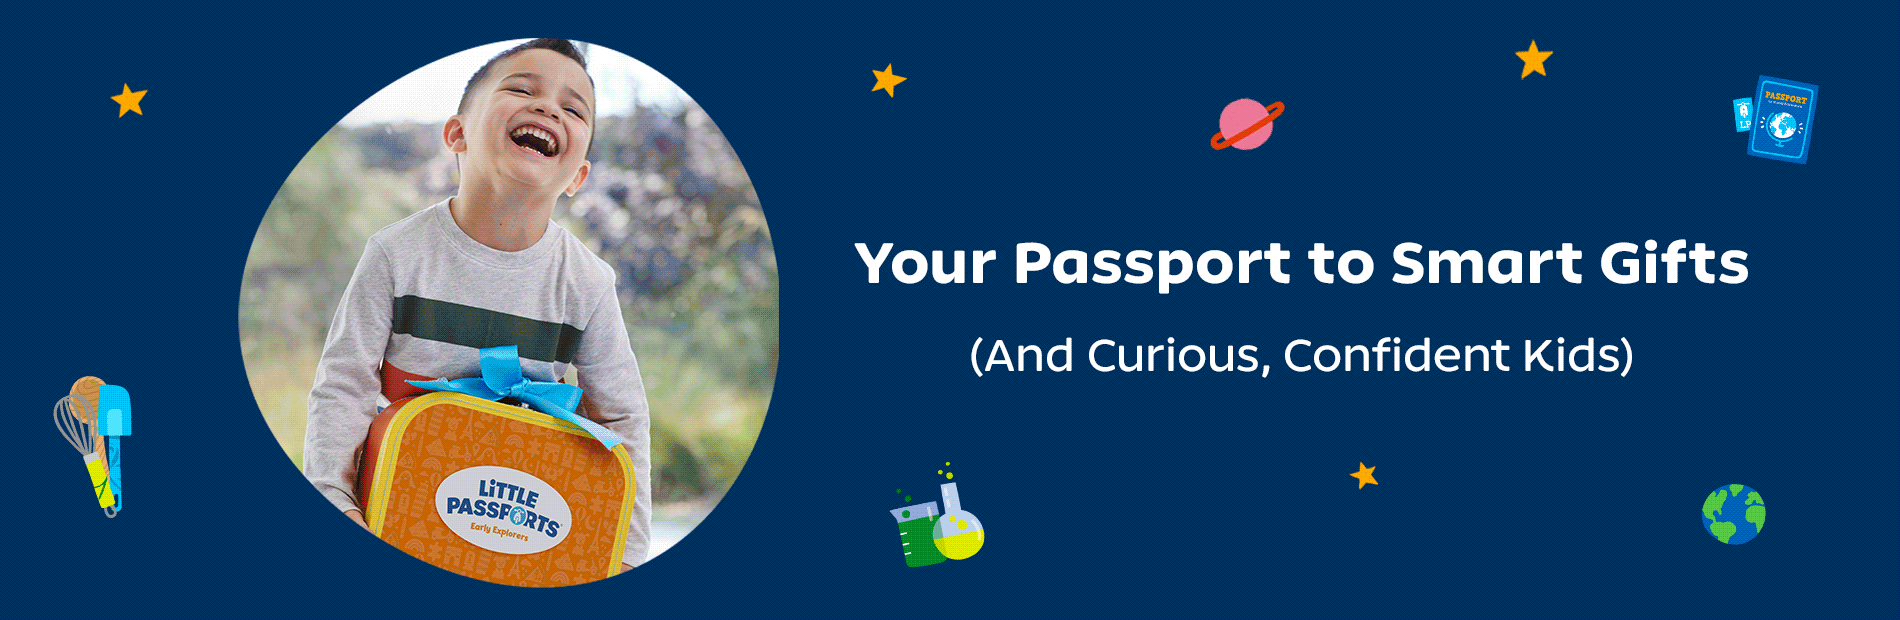 Your Passport to Smart Gifts (And Curious, Confident Kids)